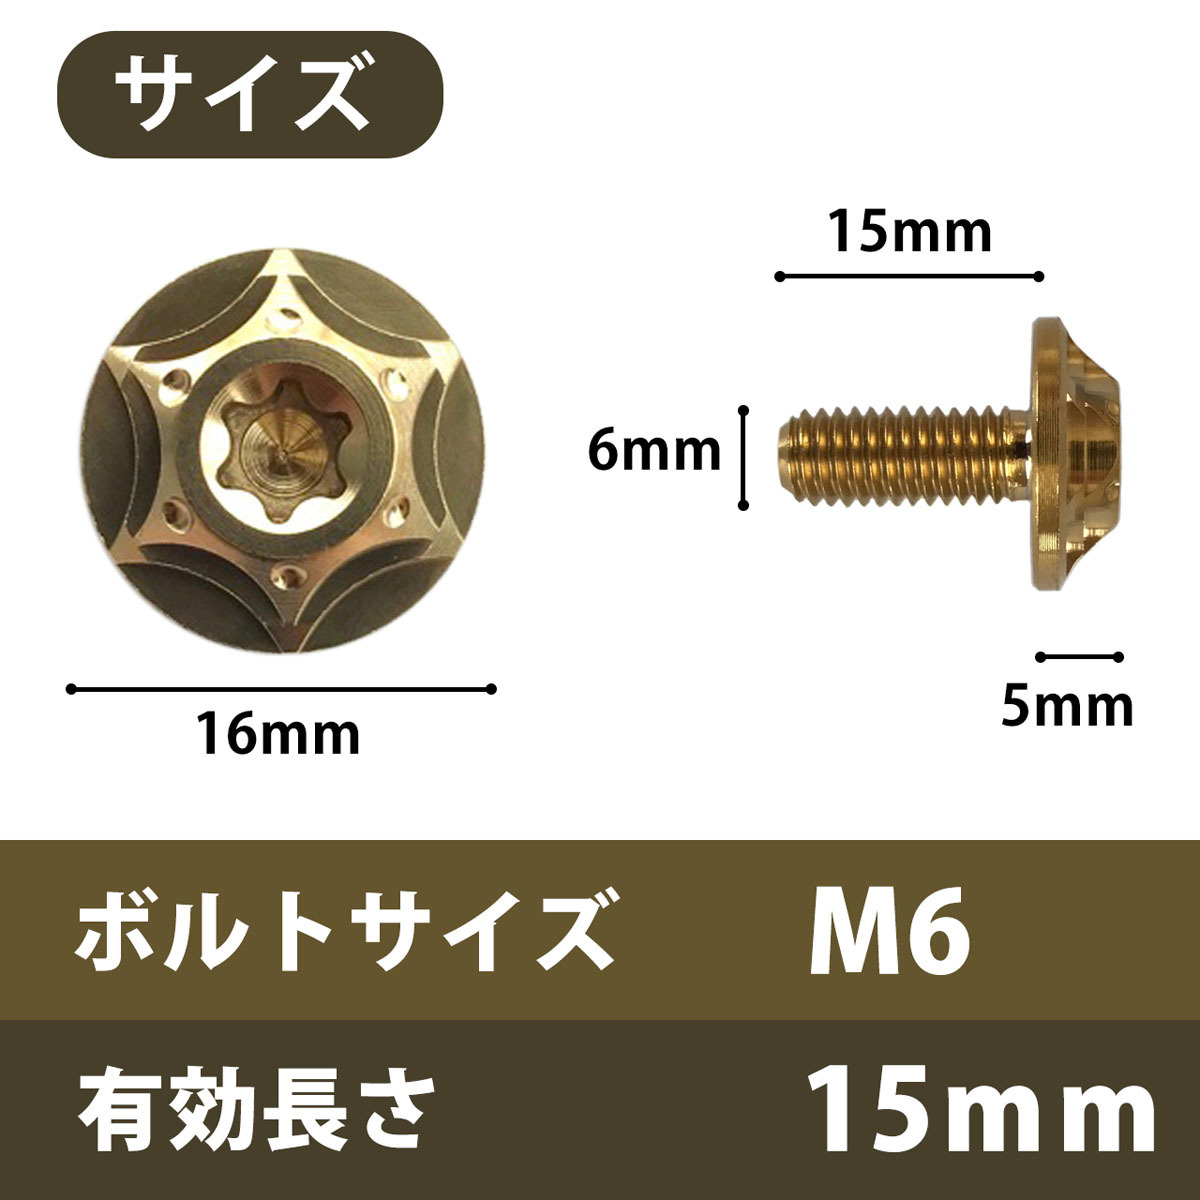  titanium alloy made bolt * Gold color * number plate exclusive use * Accord Odyssey CR-V Insight Step WGN Vezel Fit 